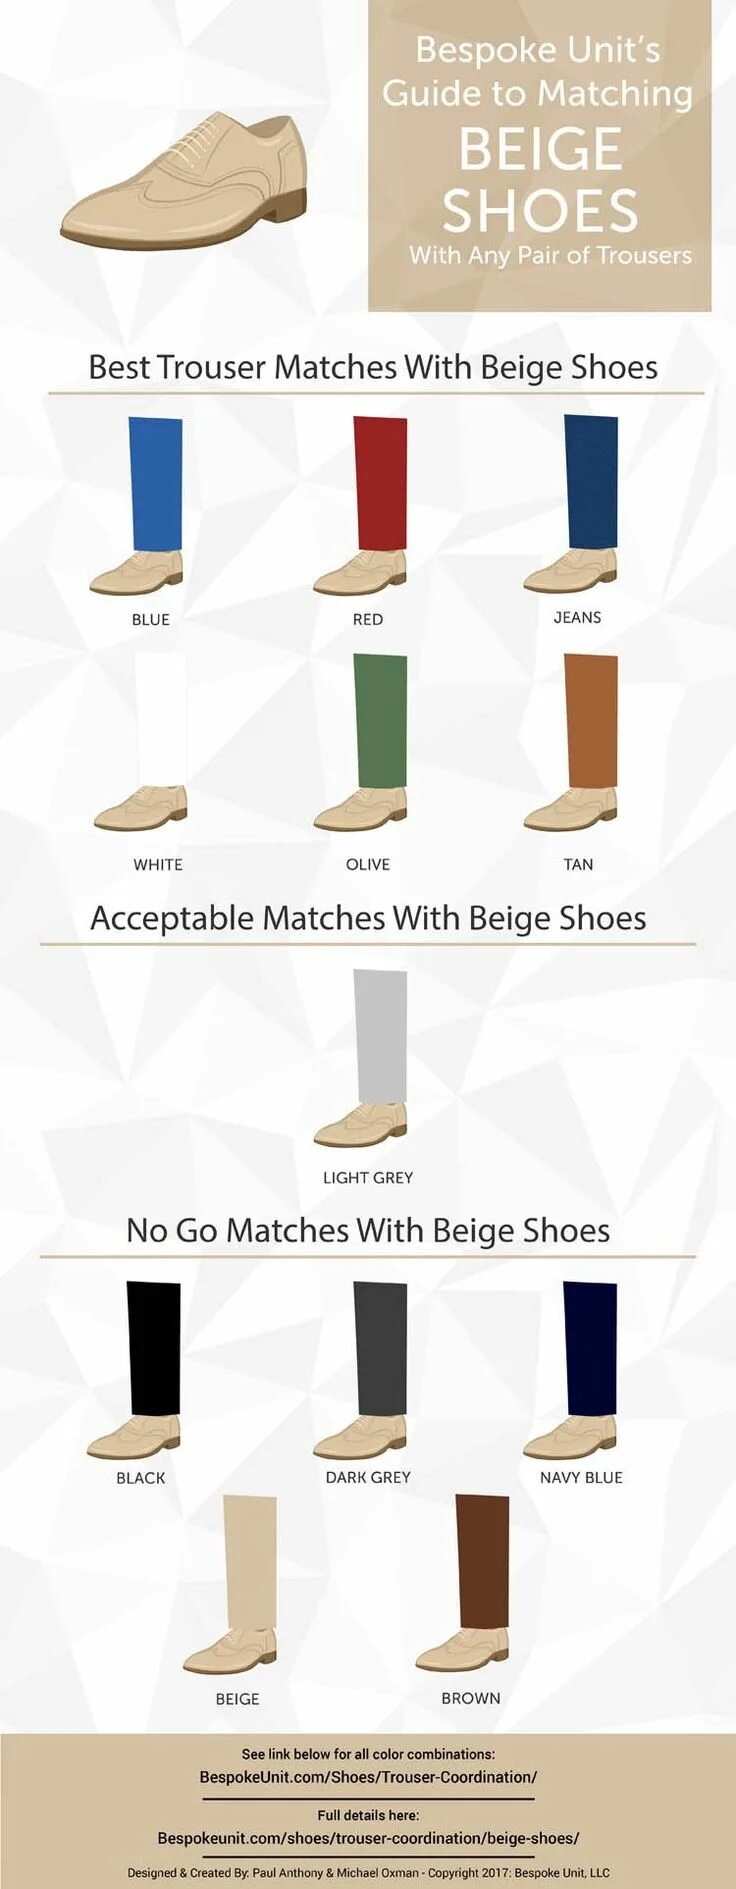 Men's Beige Shoes. Best Combos for men for Beige trousers. Colour Match Suit and Shoes. Colour Shoes Match with Costumes.